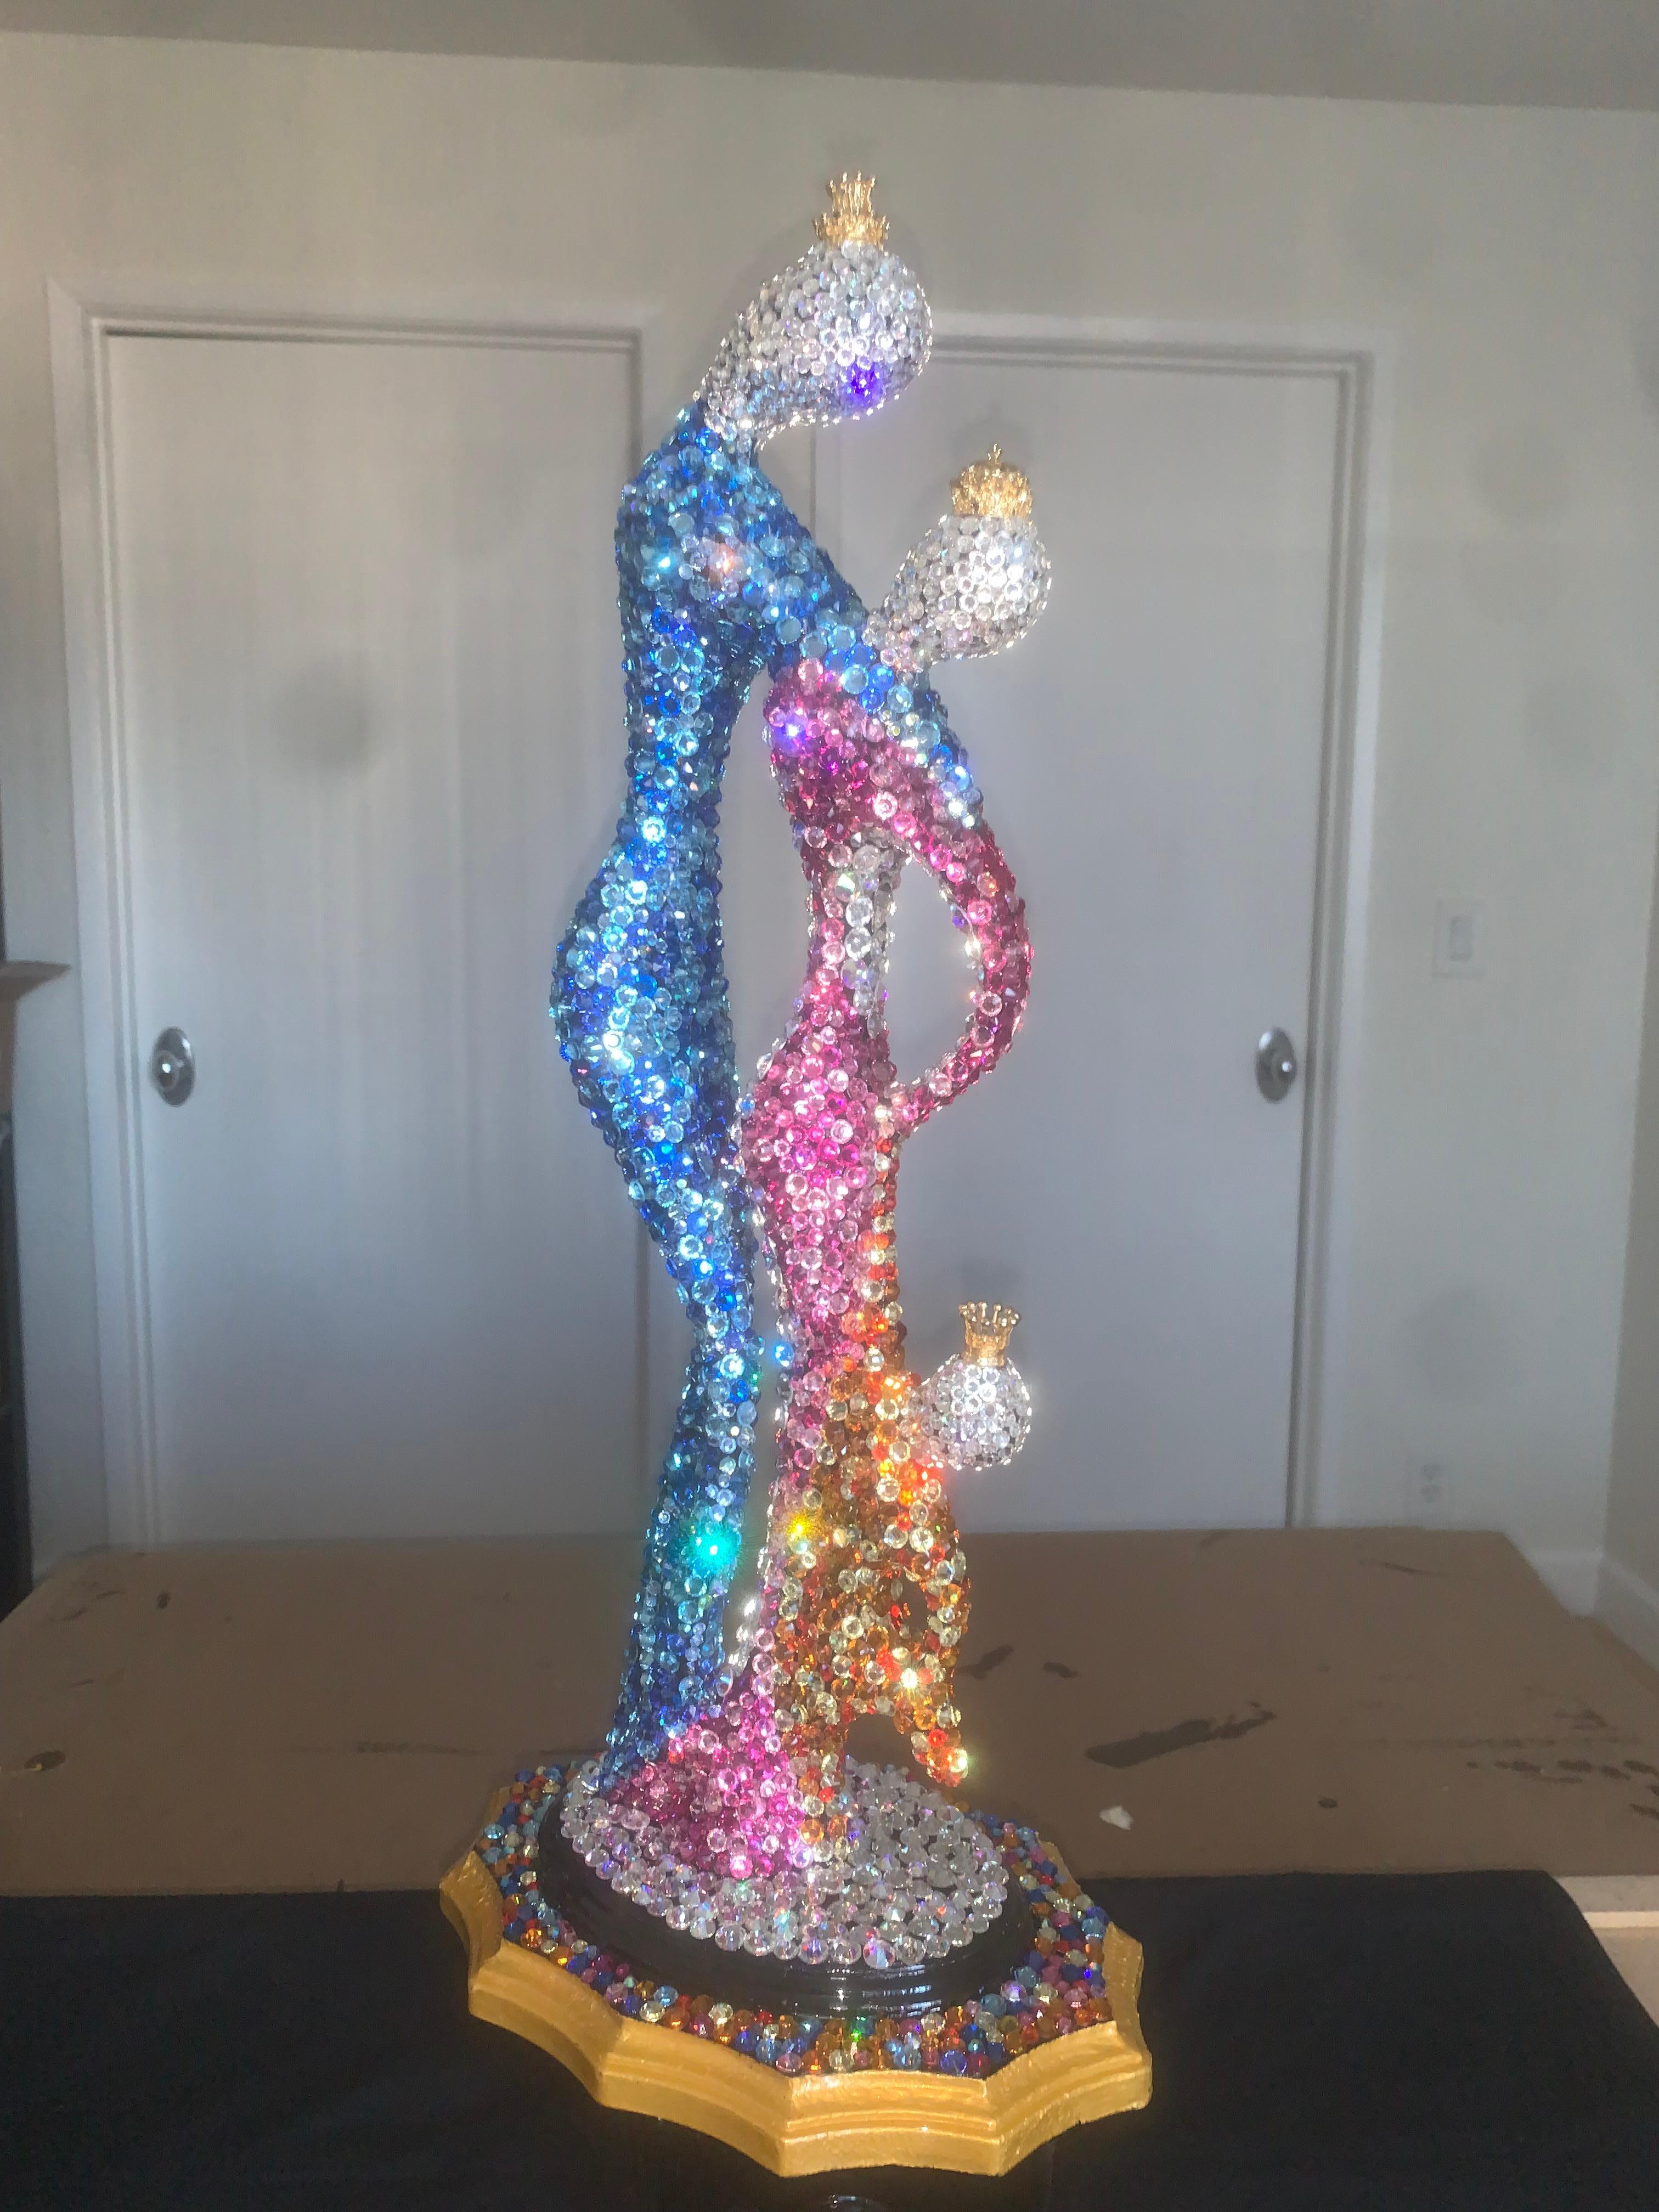 THE ROYAL FAMILY (1 Of a Kind Sculpture W/ Genuine Swarovski Crystals) 3